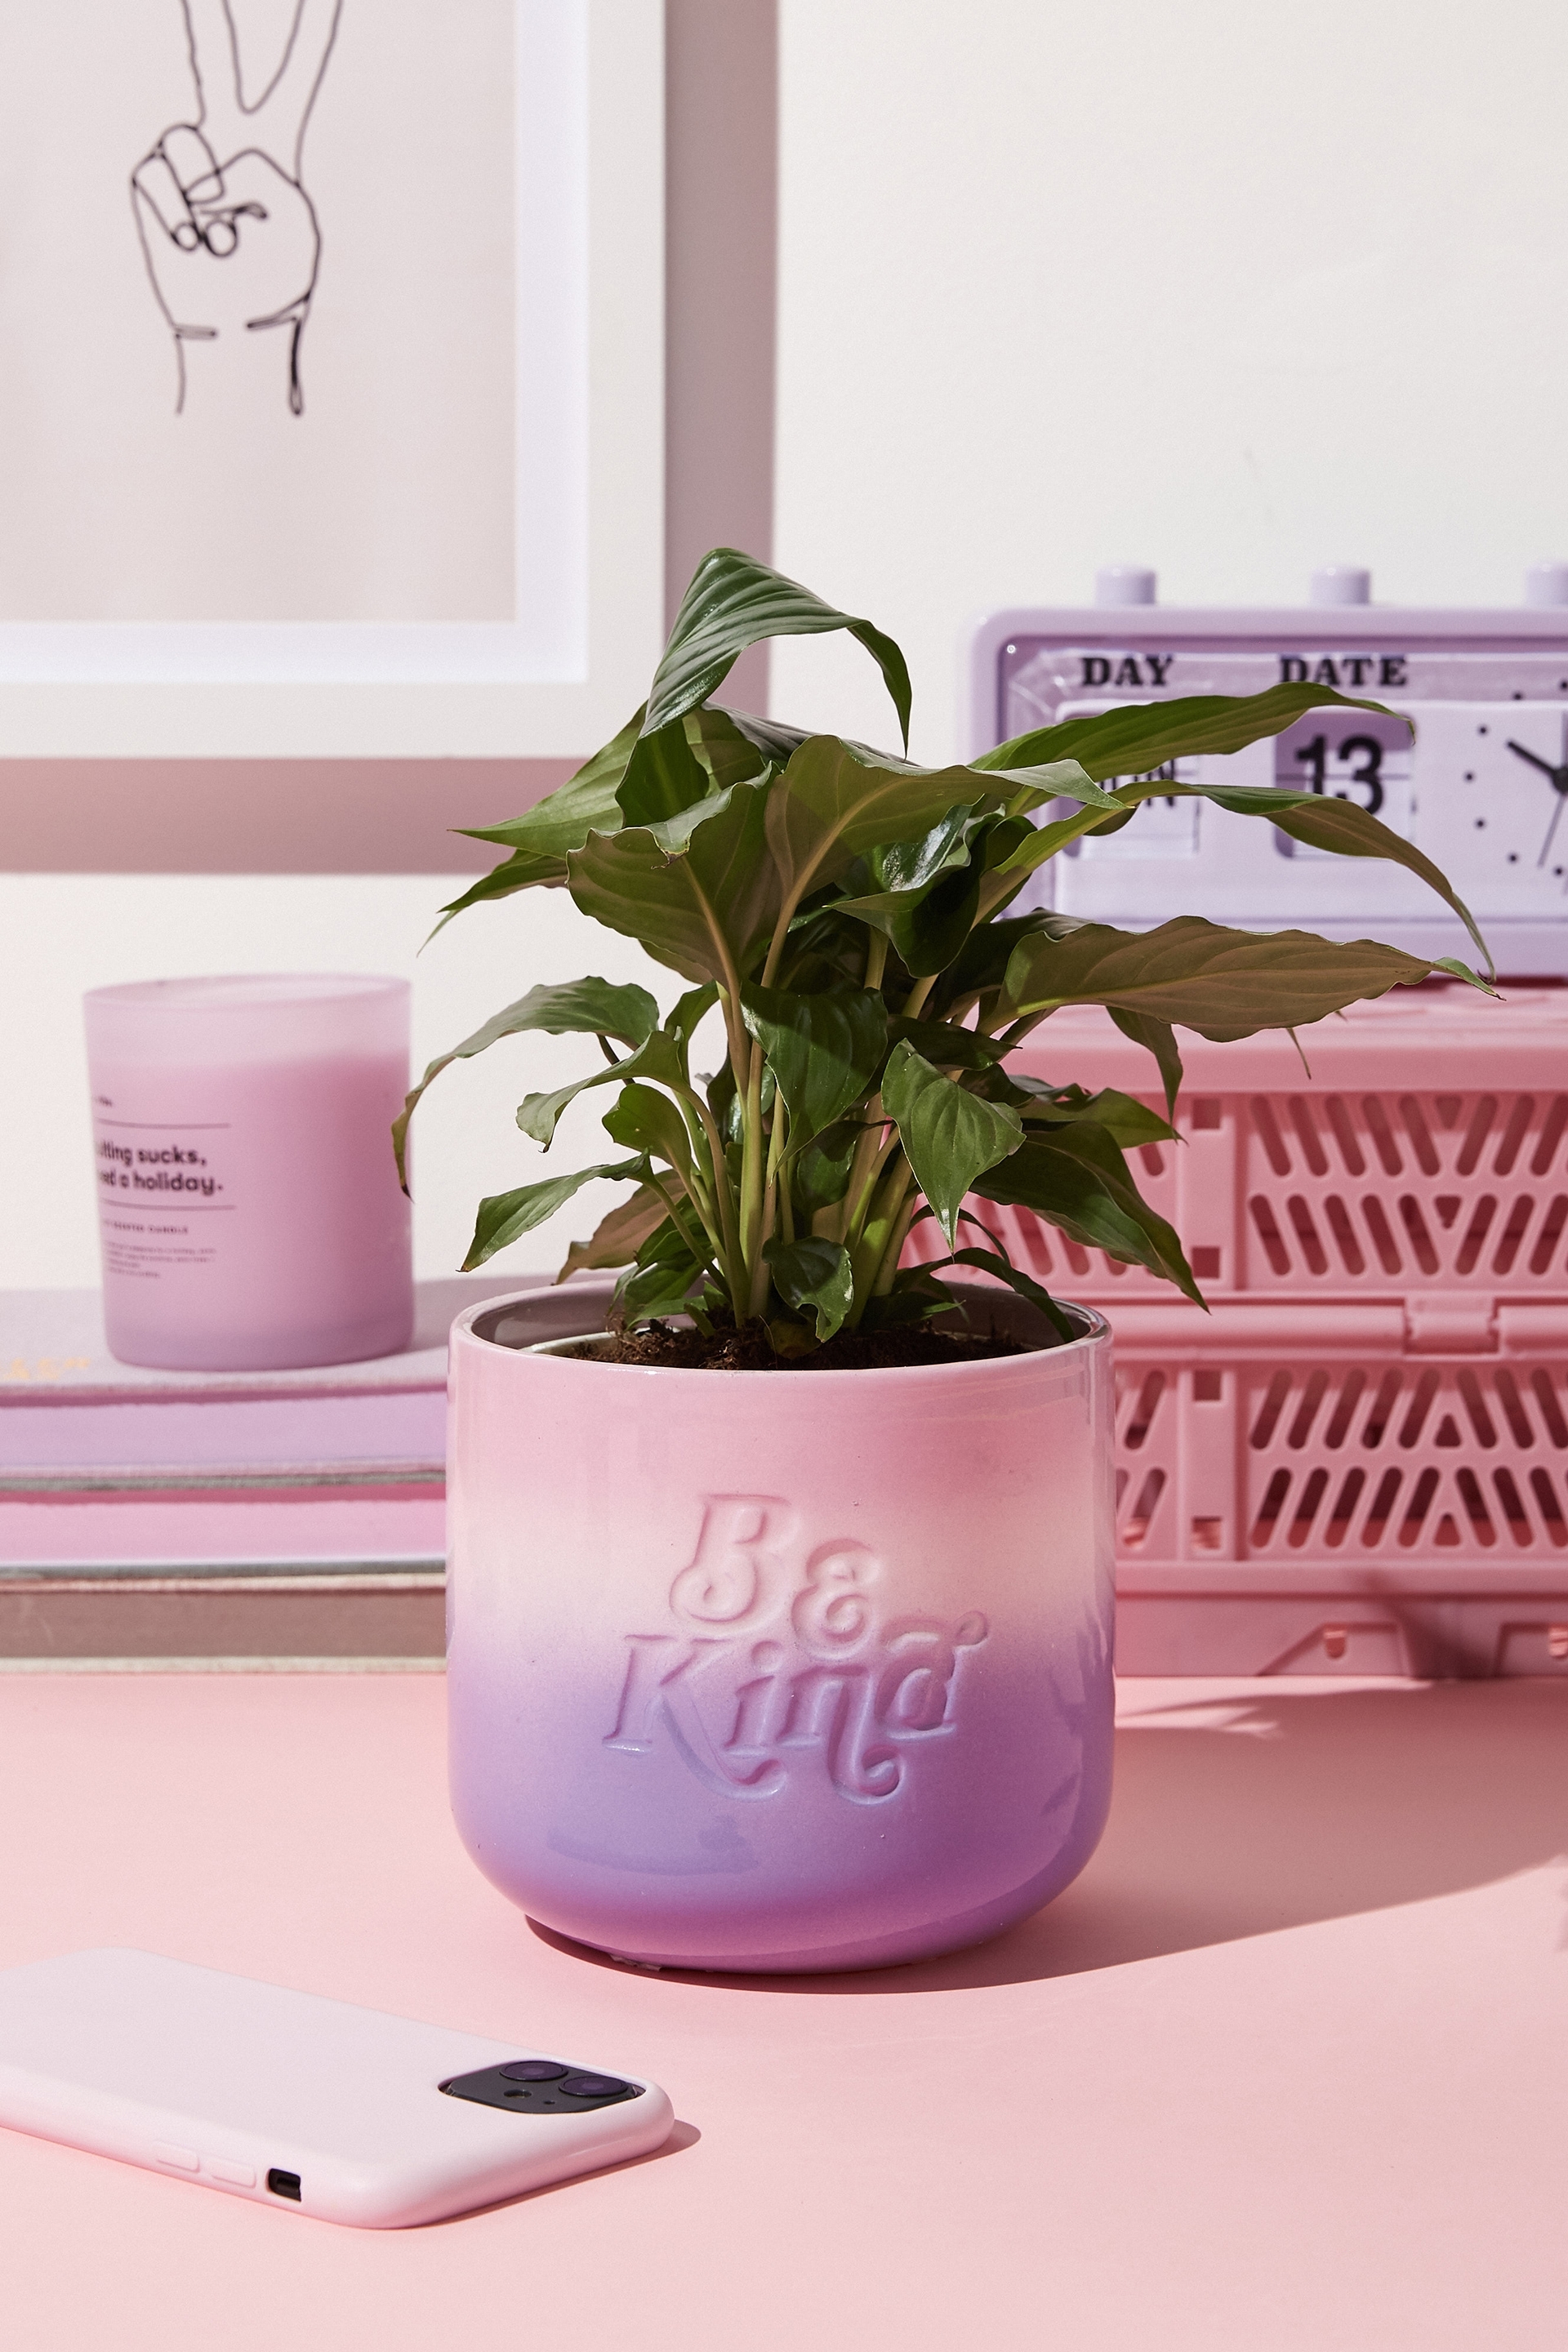 Typo - Midi Shaped Planter - Be kind pale lilac ombre